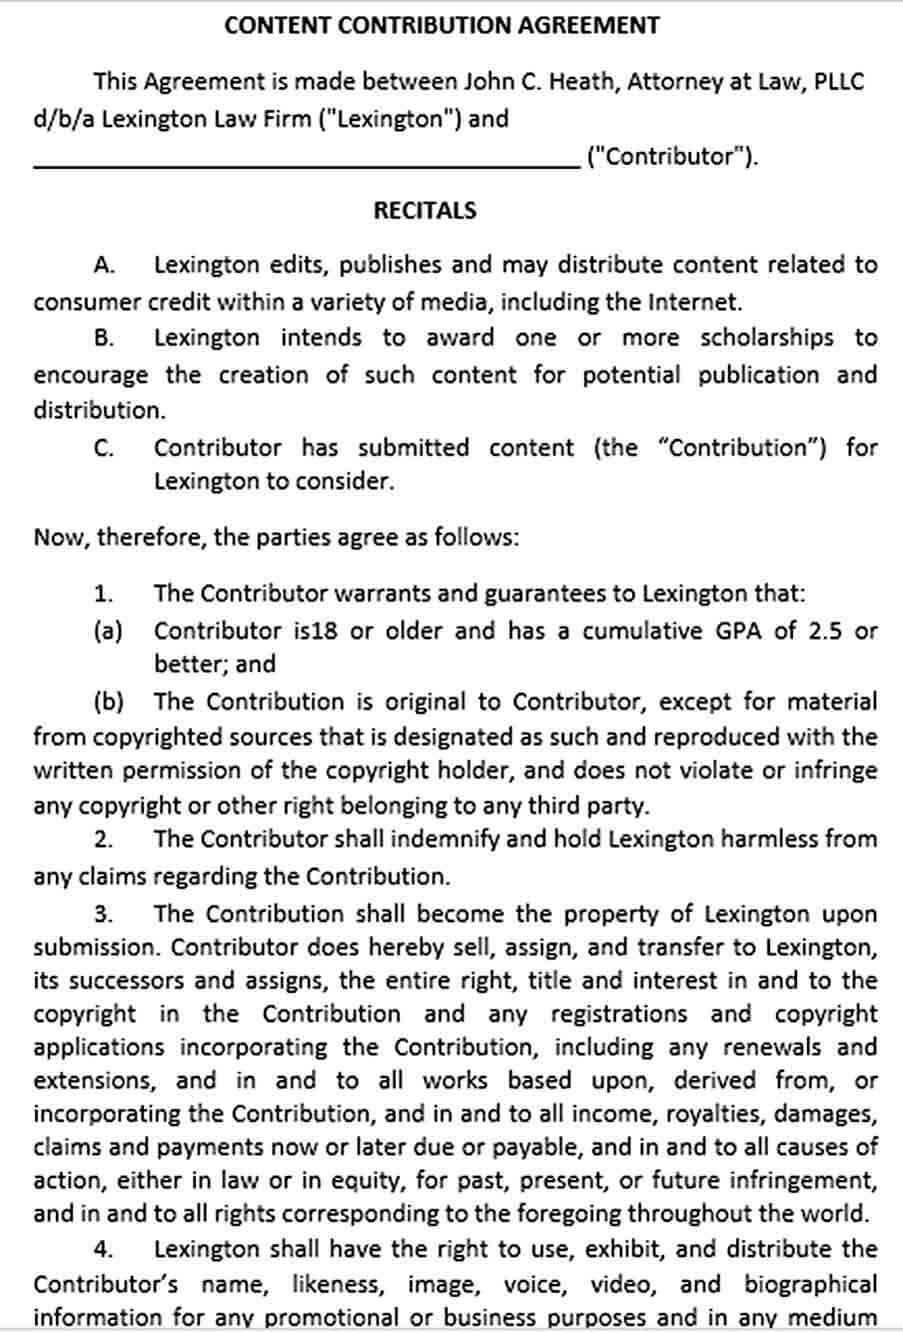 Sample Content Contribution Agreement